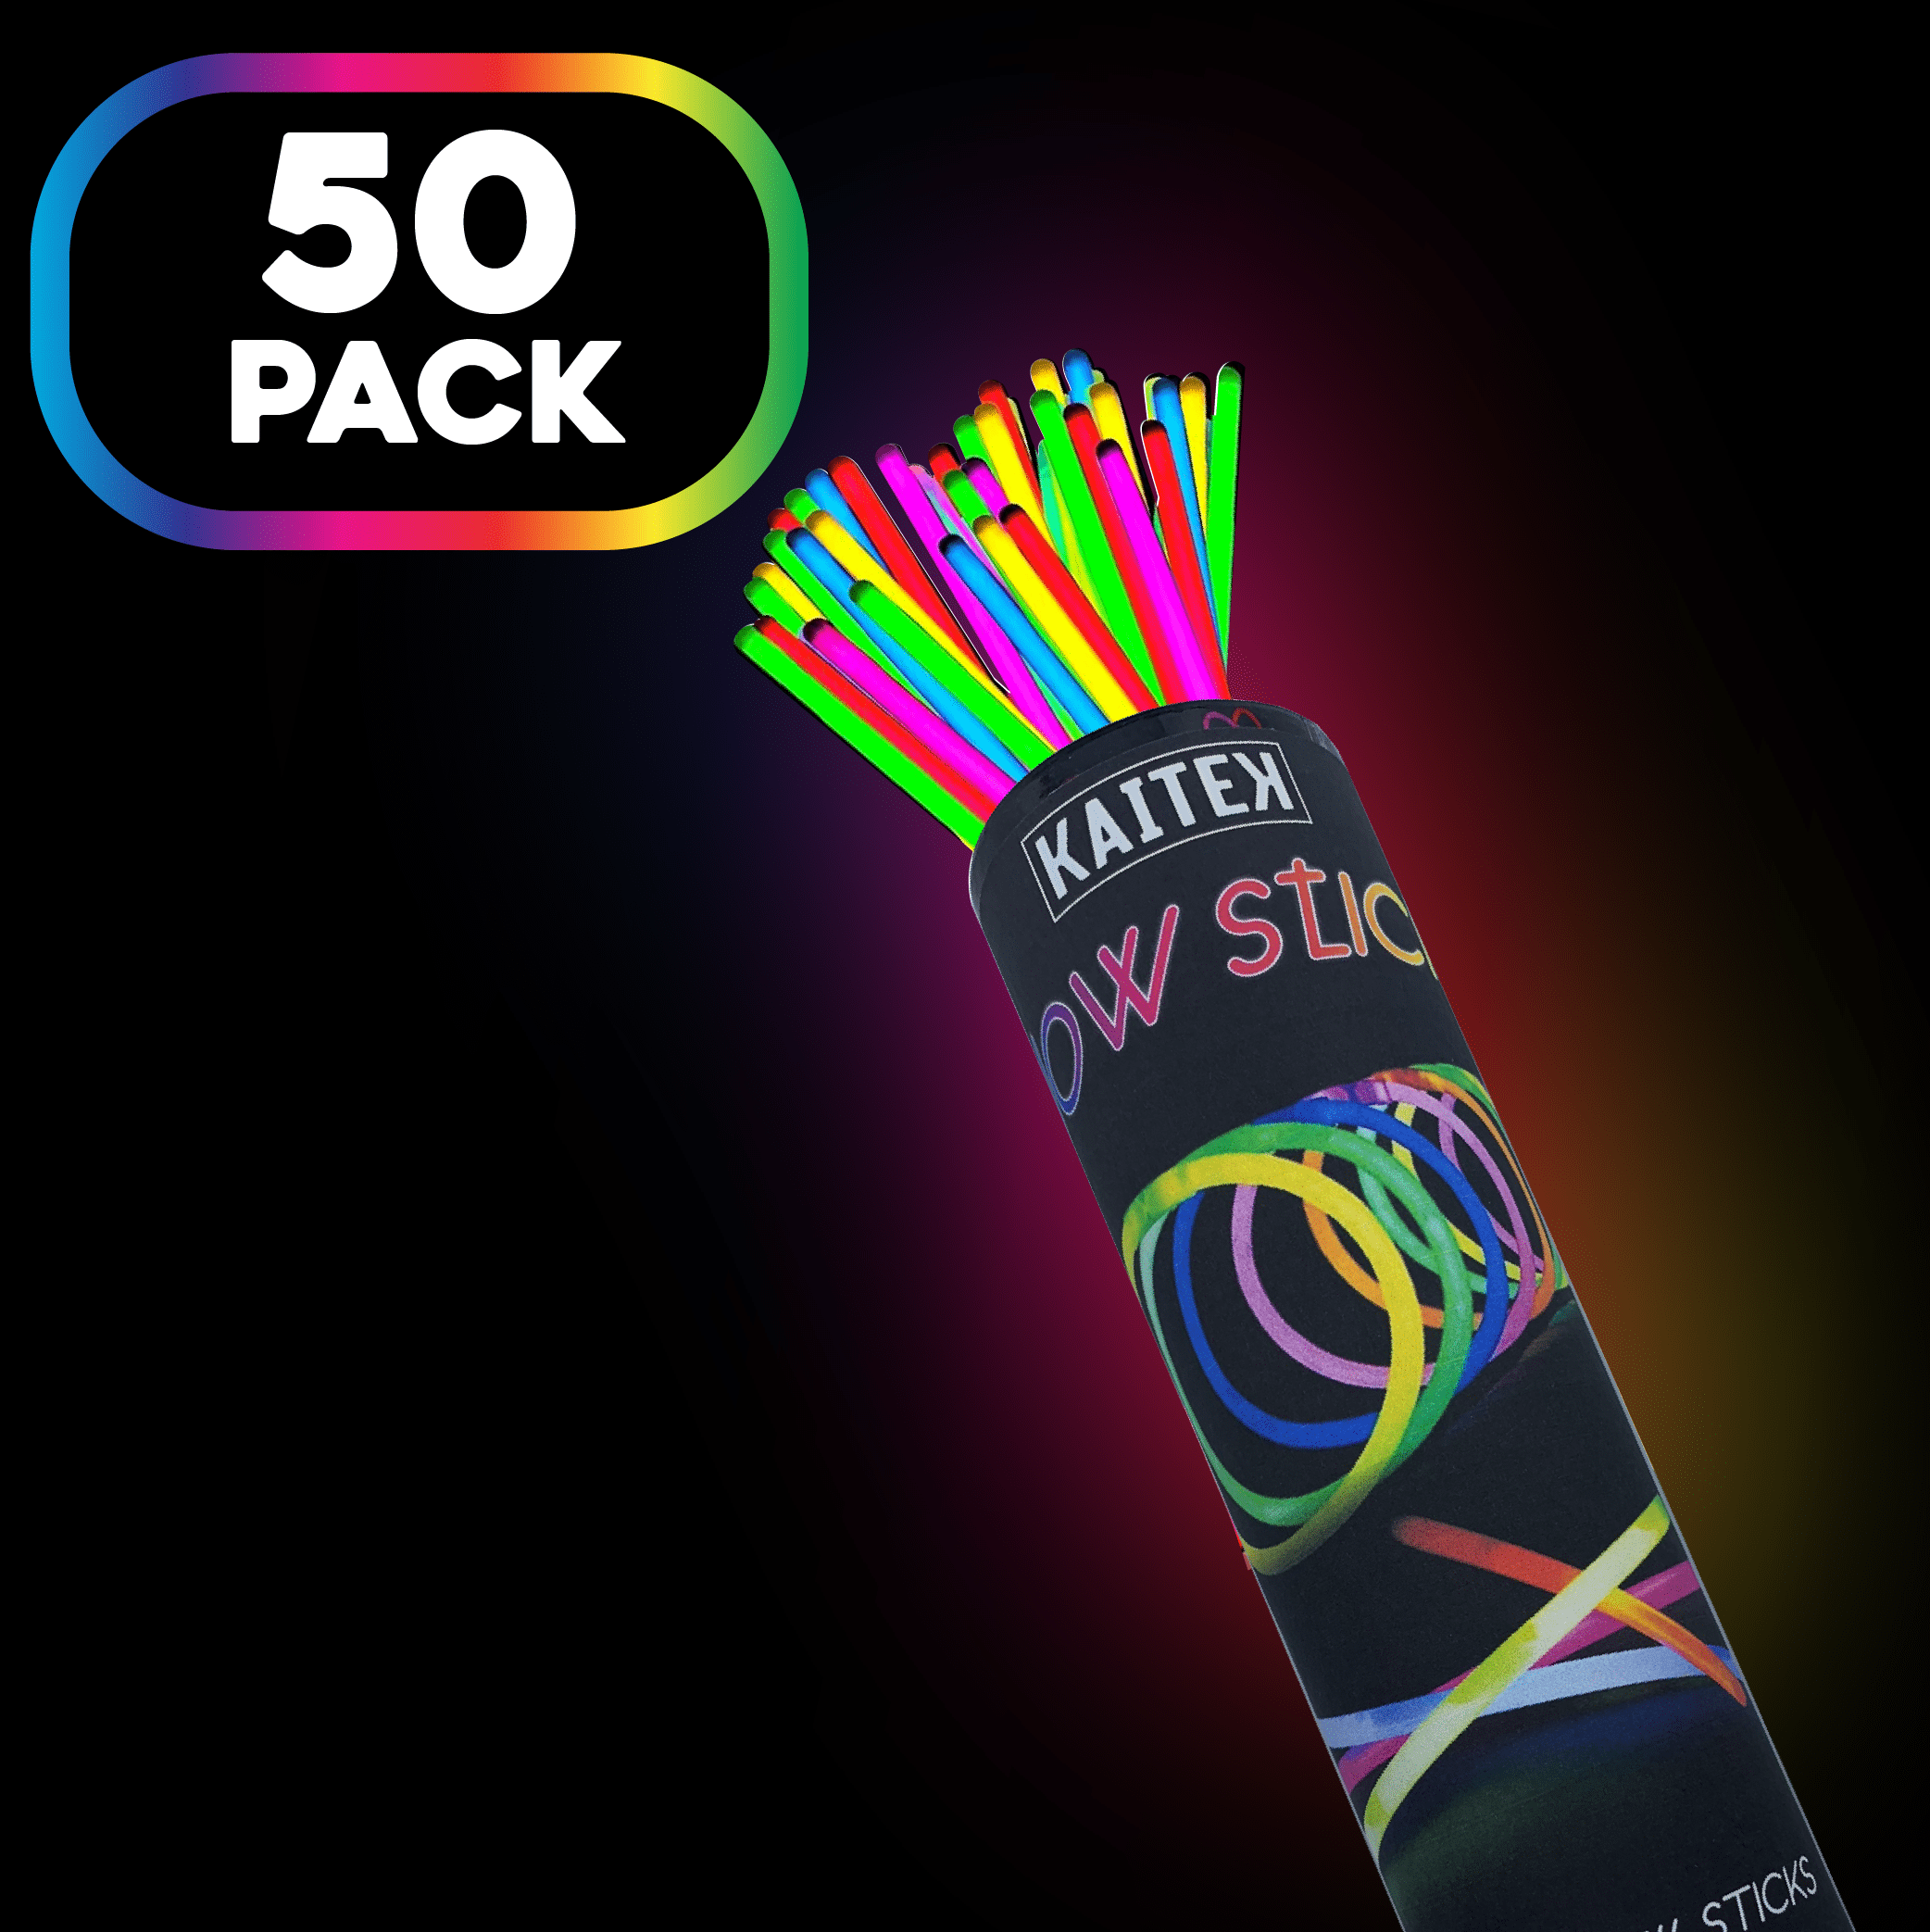 Glow in the Dark Party Supplies,Party Favors for Kids 4-12,Neon party  Supplies,Halloween Party Favors,Glow Sticks Party Pack,Glow Party,Birthday  Party Supplies,Light Up Toys,Led Toys,Glow Sticks Bulk - Coupon Codes,  Promo Codes, Daily Deals